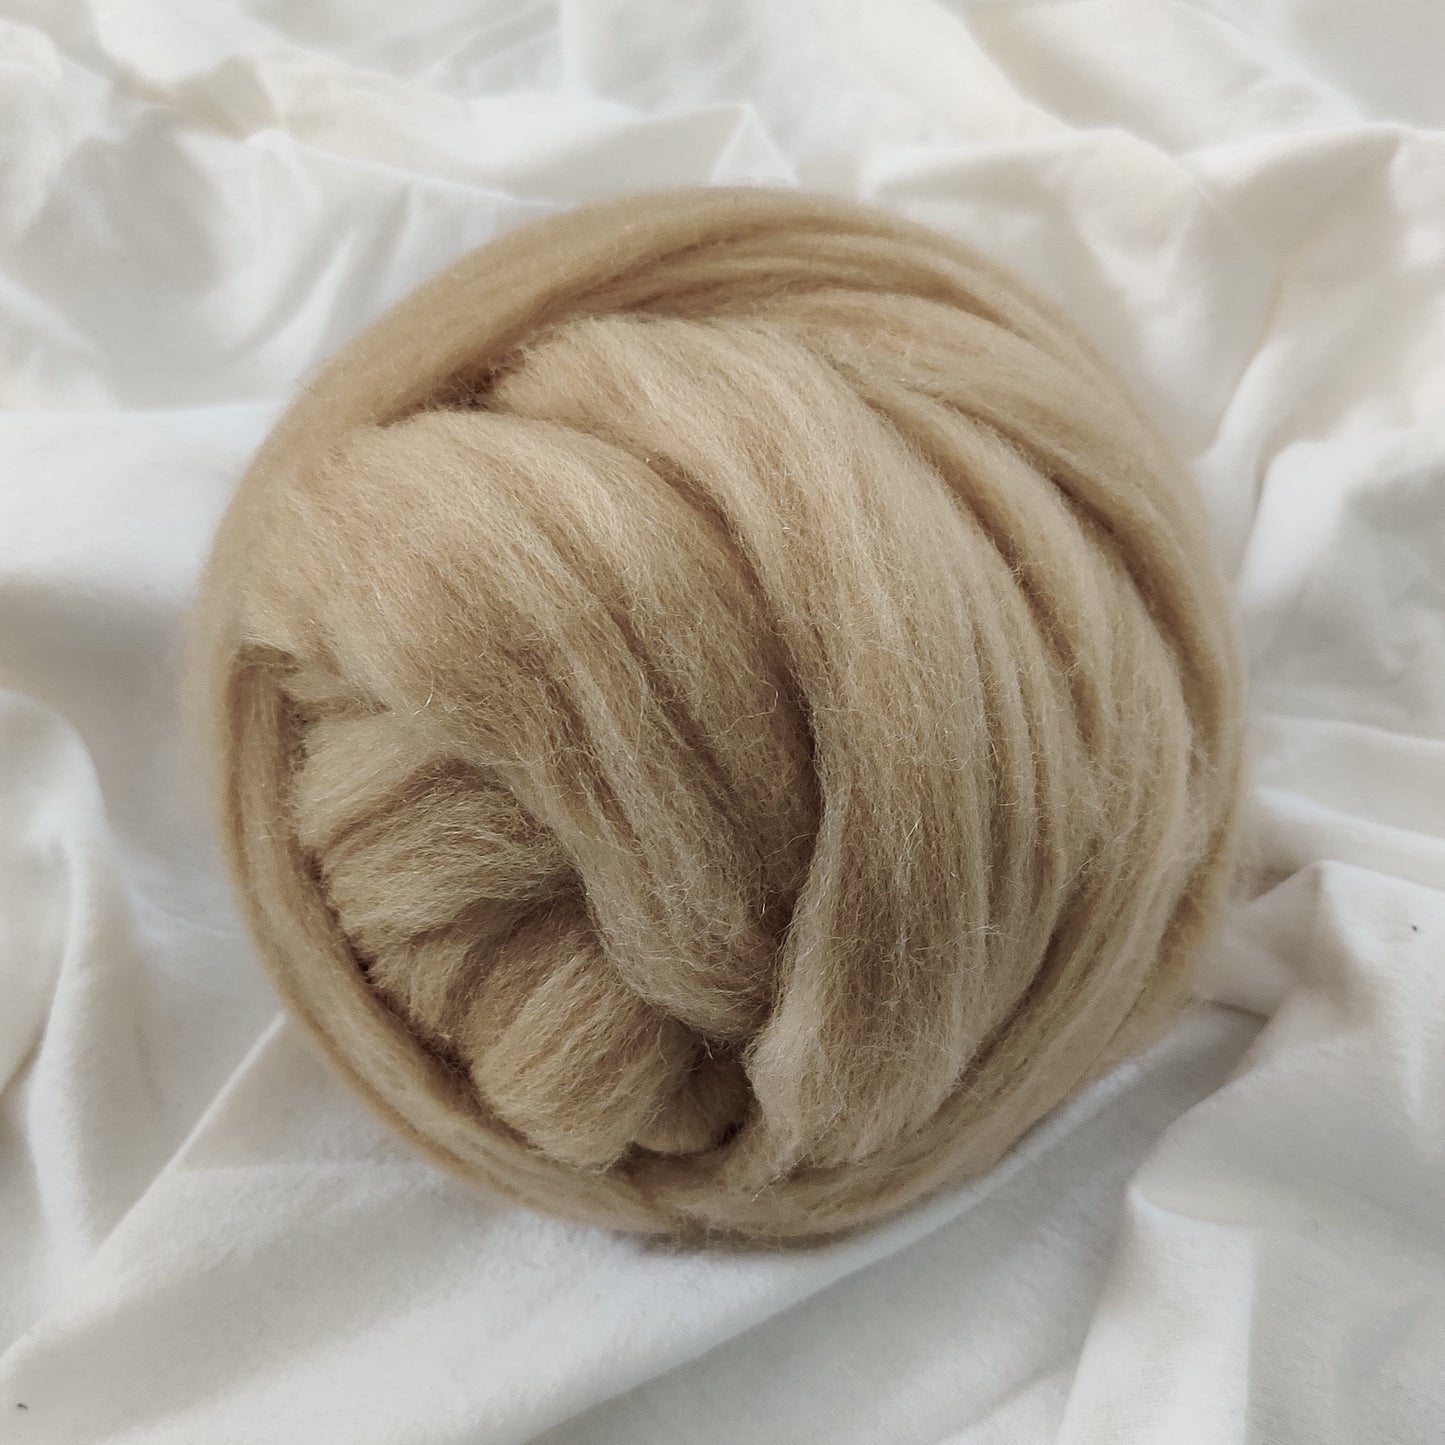 Instructions and merino wool yarn for the ONNI baby nest